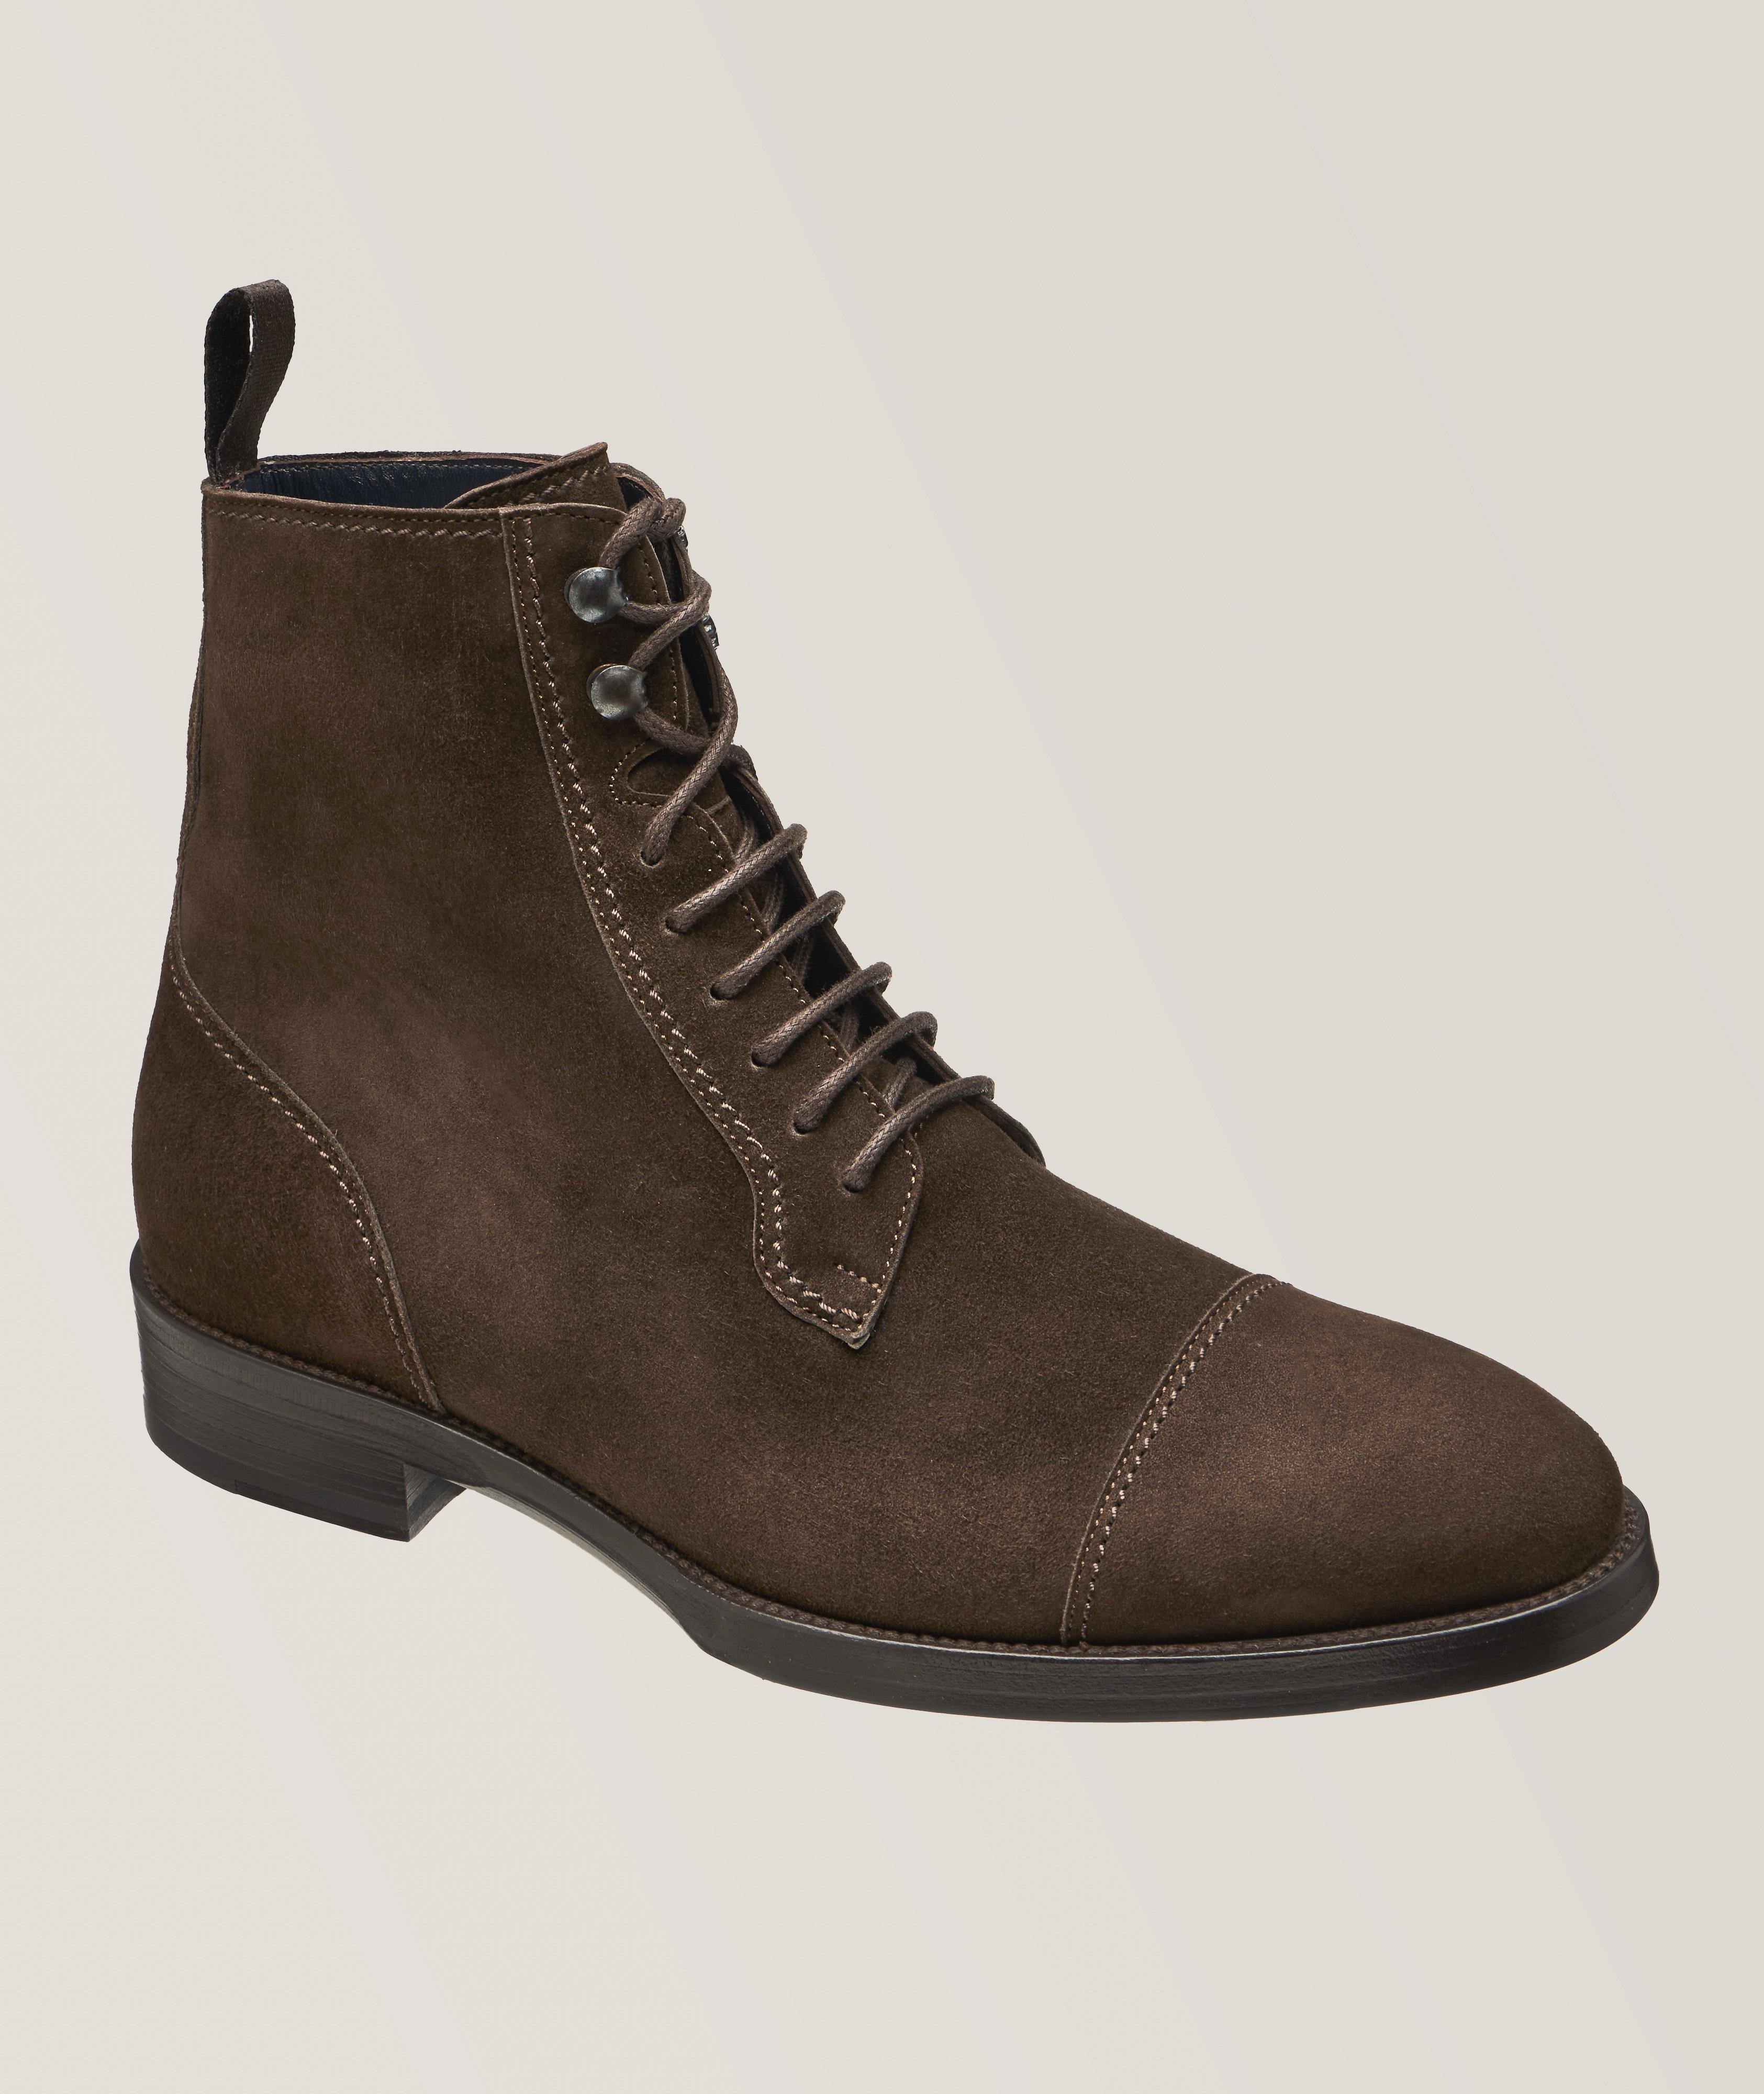 Suede Leather Captoe Boots image 0